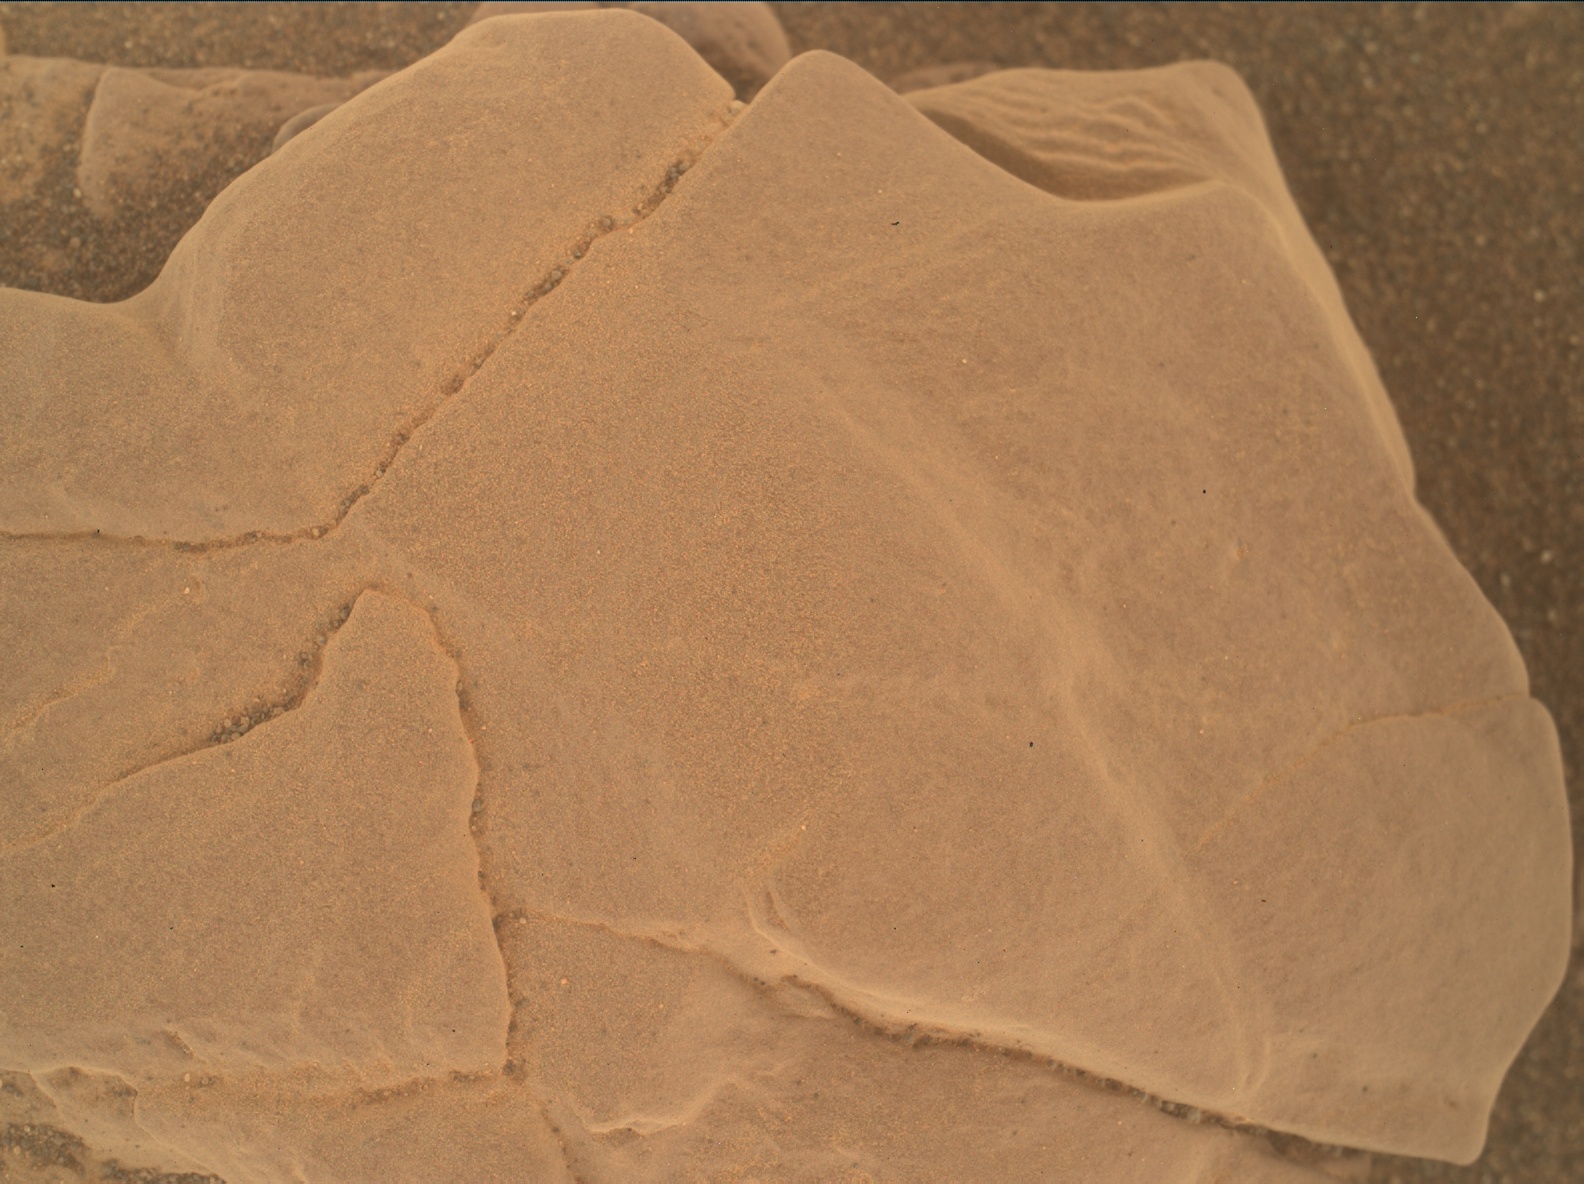 Nasa's Mars rover Curiosity acquired this image using its Mars Hand Lens Imager (MAHLI) on Sol 2940